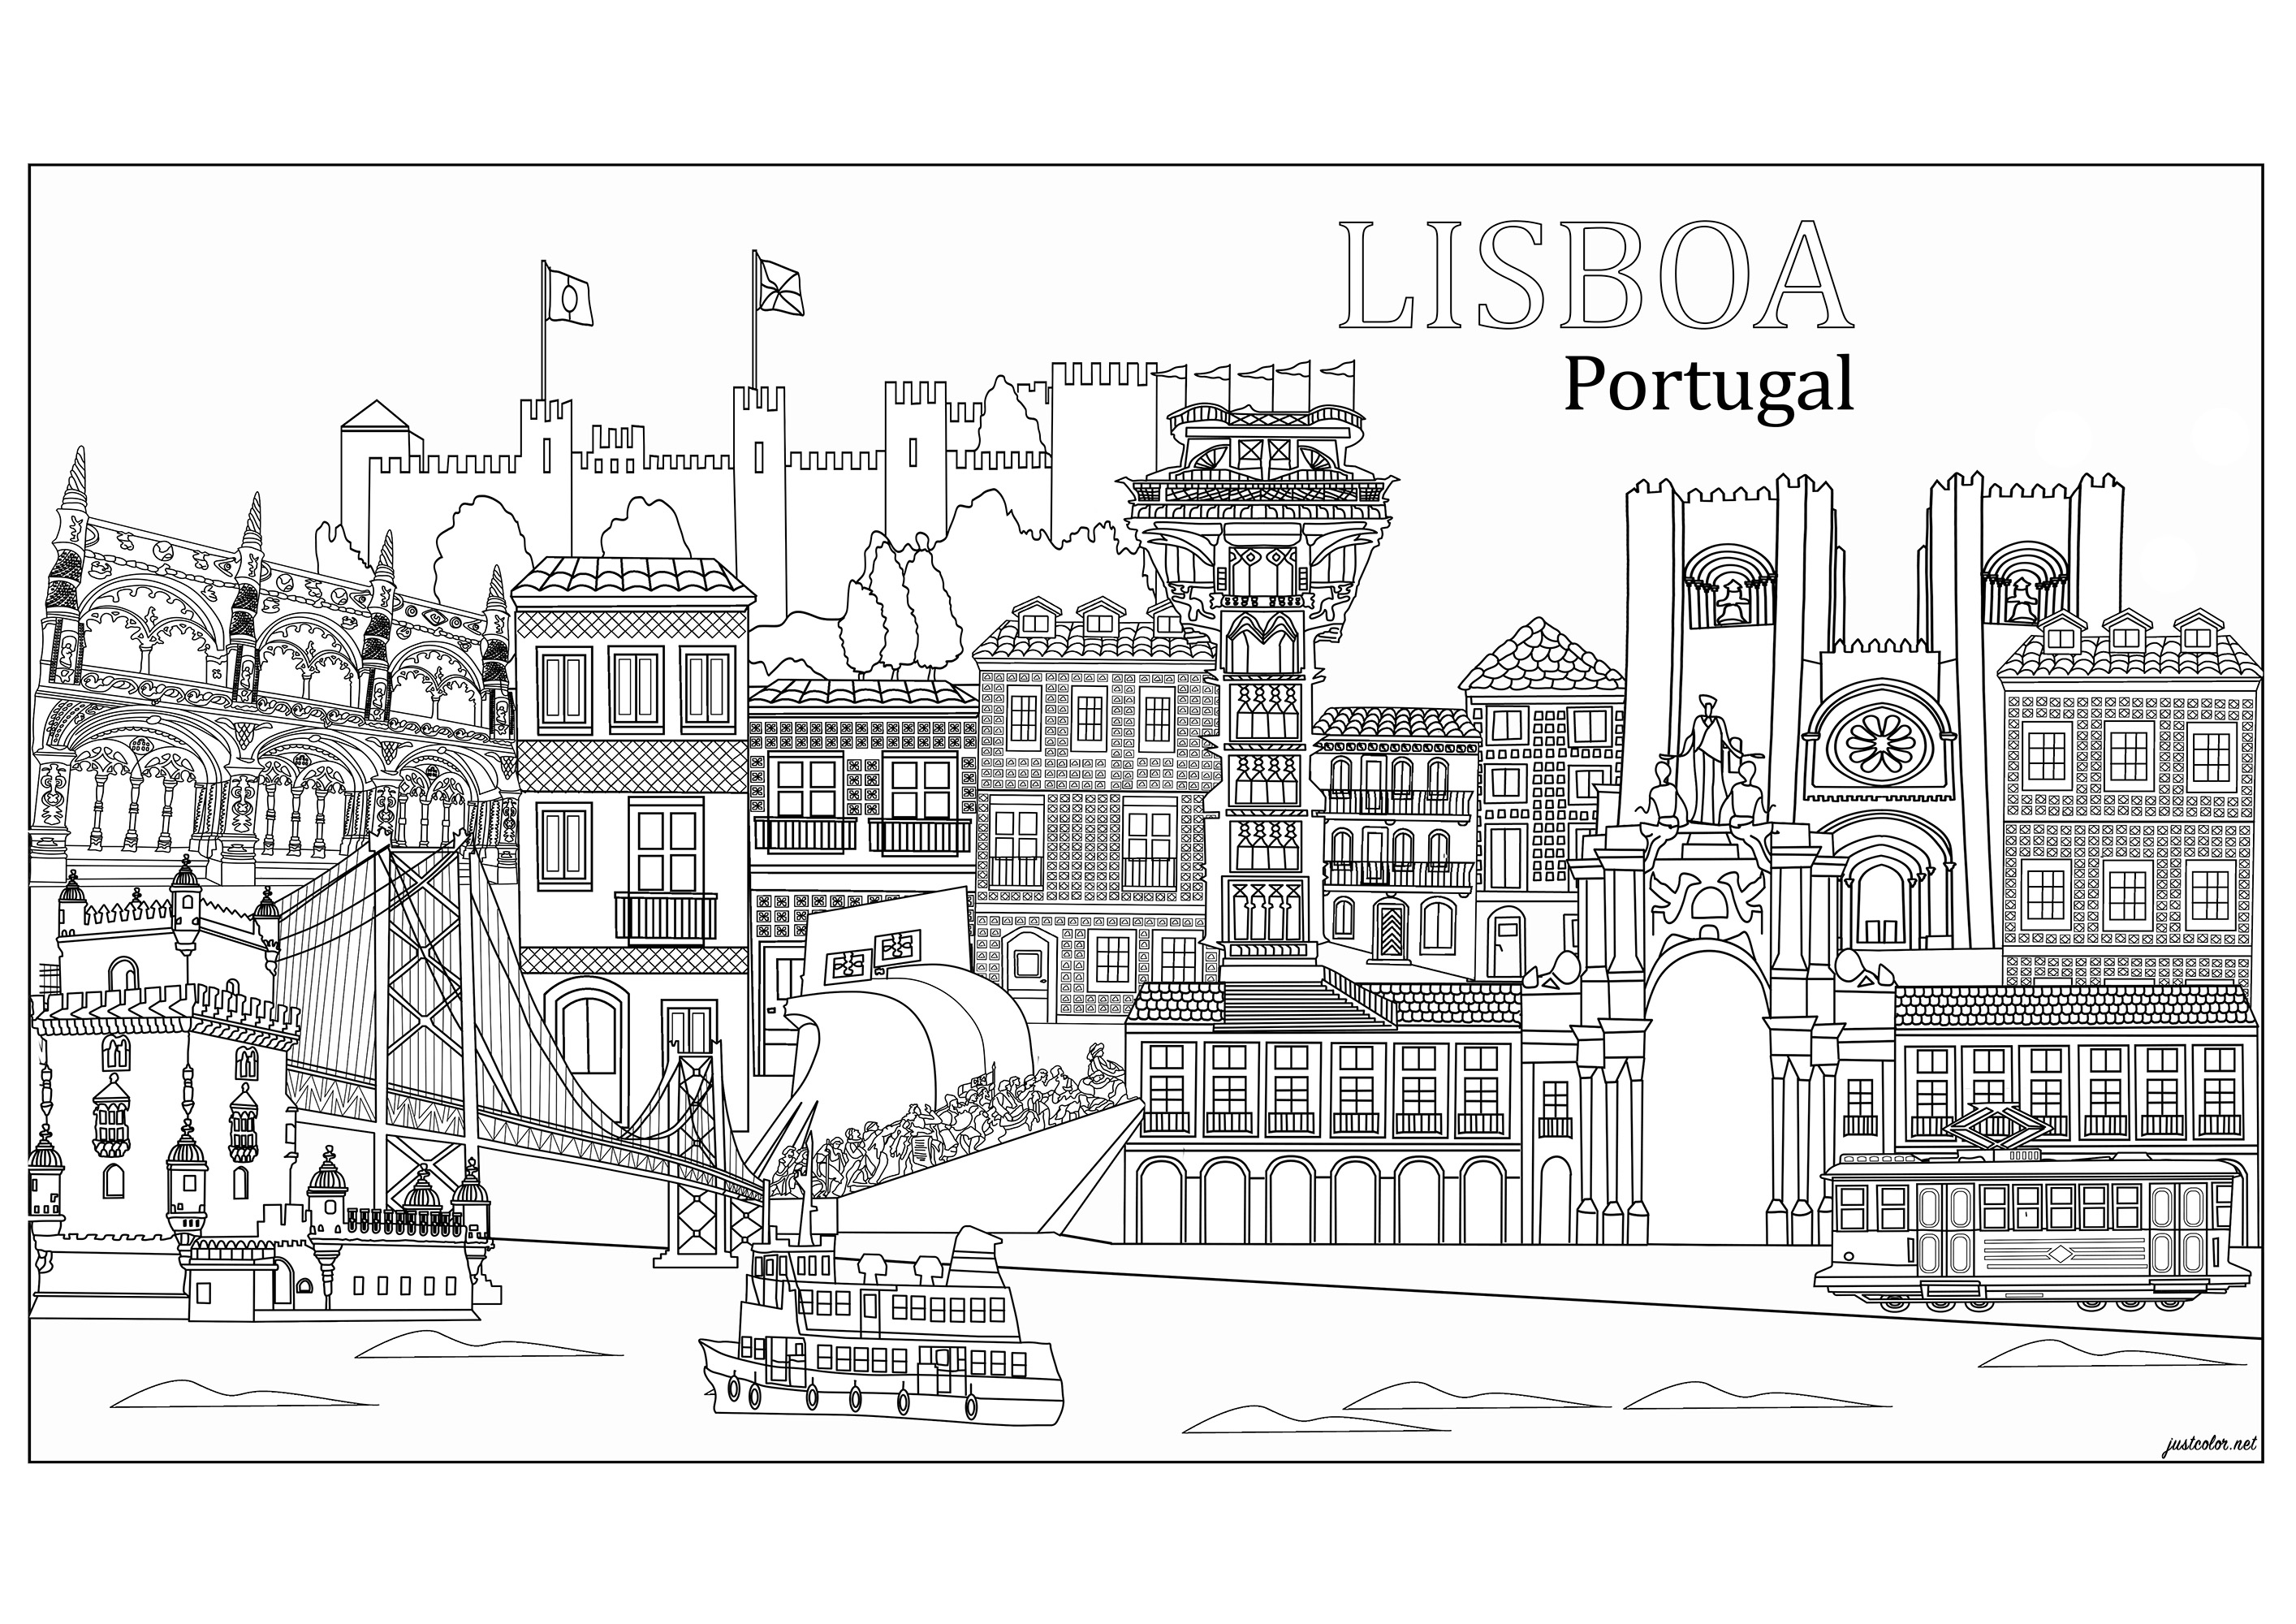 Main monuments in Lisbon, Portugal. This coloring page features São Jorge castle, Lisbon cathedral, Santa Justa elevator, Rossio square, Augusta street arch, Hieronymite monastery, Belém tower, Monument to the Discoveries .., Artist : Morgan